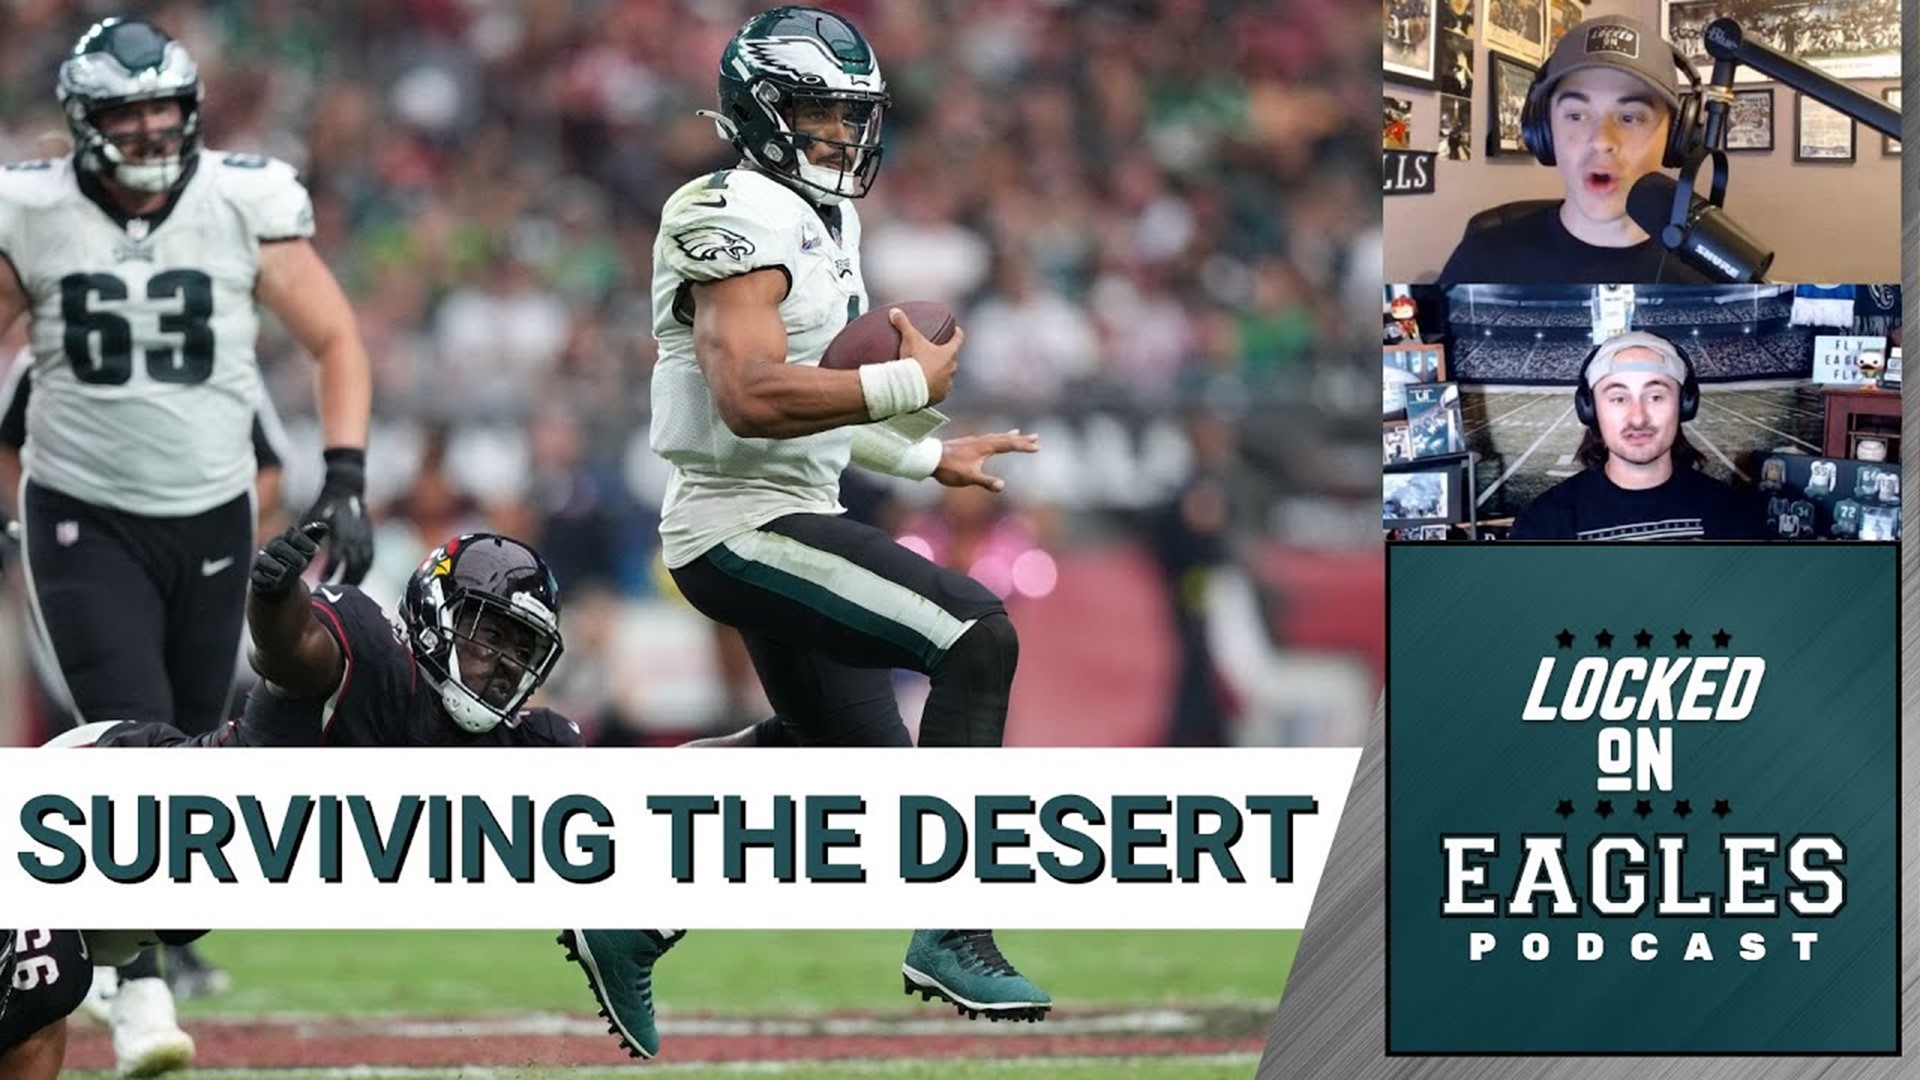 The Philadelphia Eagles beat the Arizona Cardinals in Arizona for the first time since 2001, moving to 5-0 on the season.